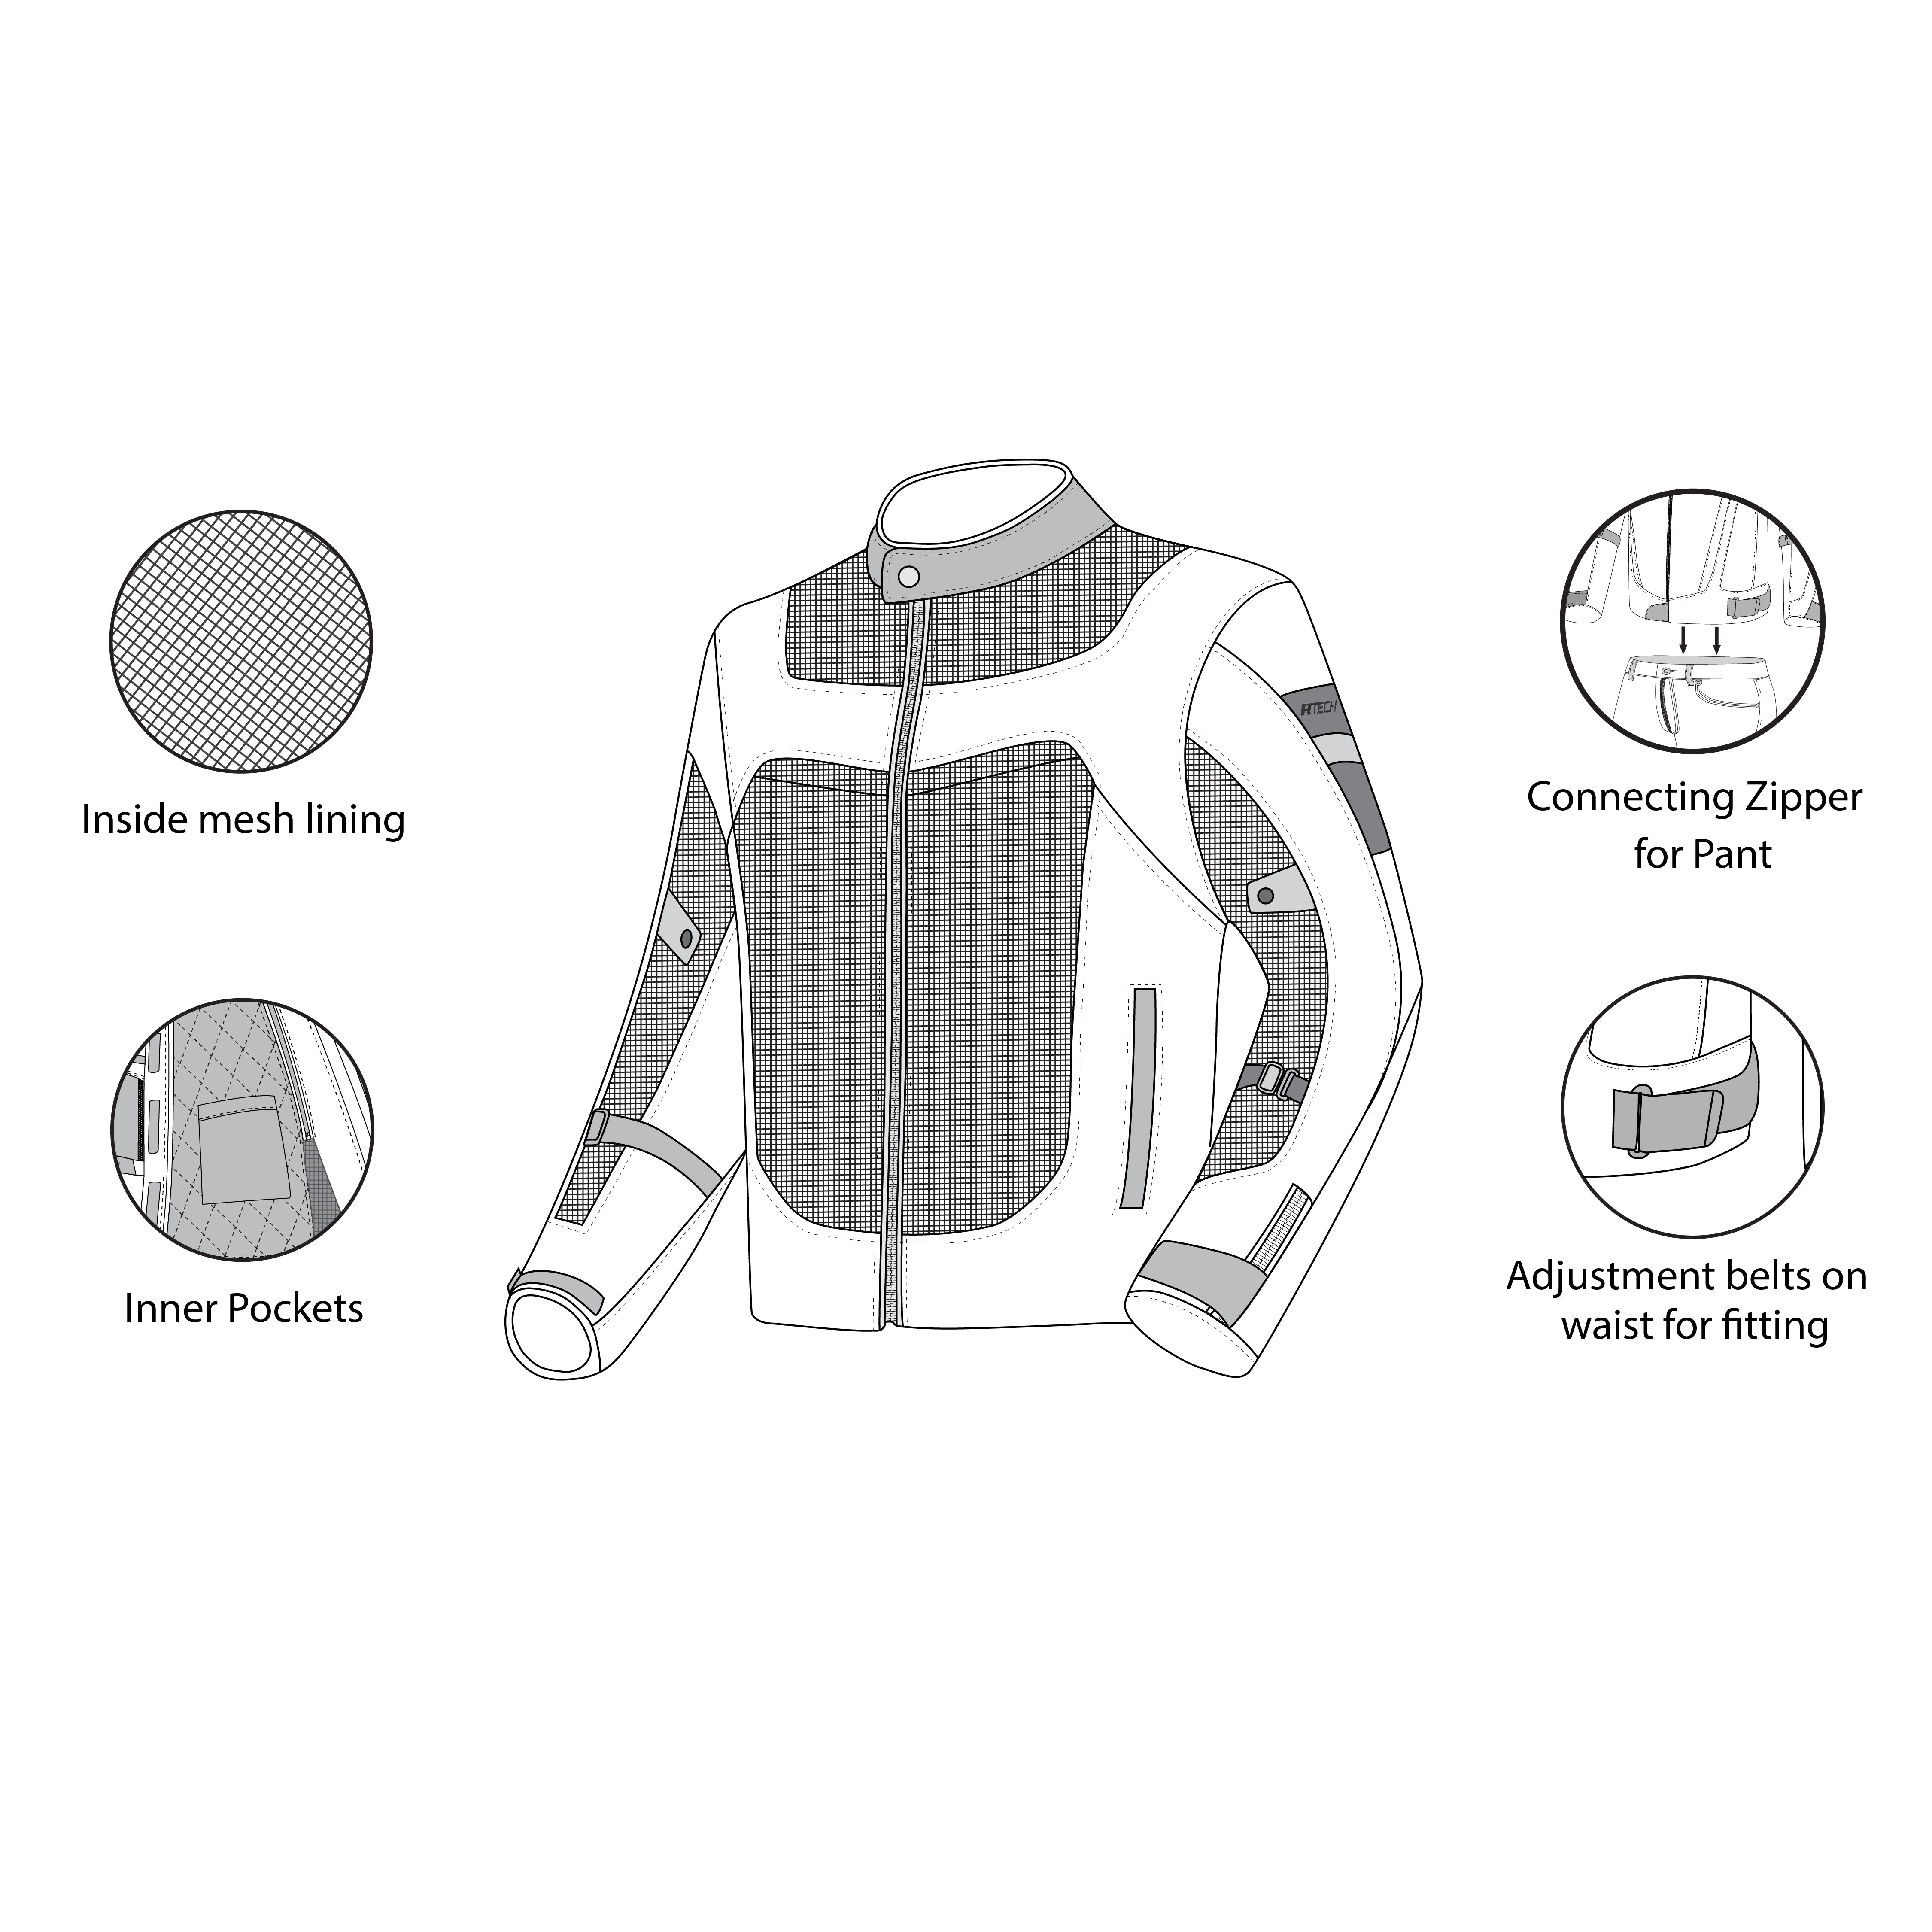 infographic sketch r-tech spiral mesh textile jacket blue Grey and green top front side view